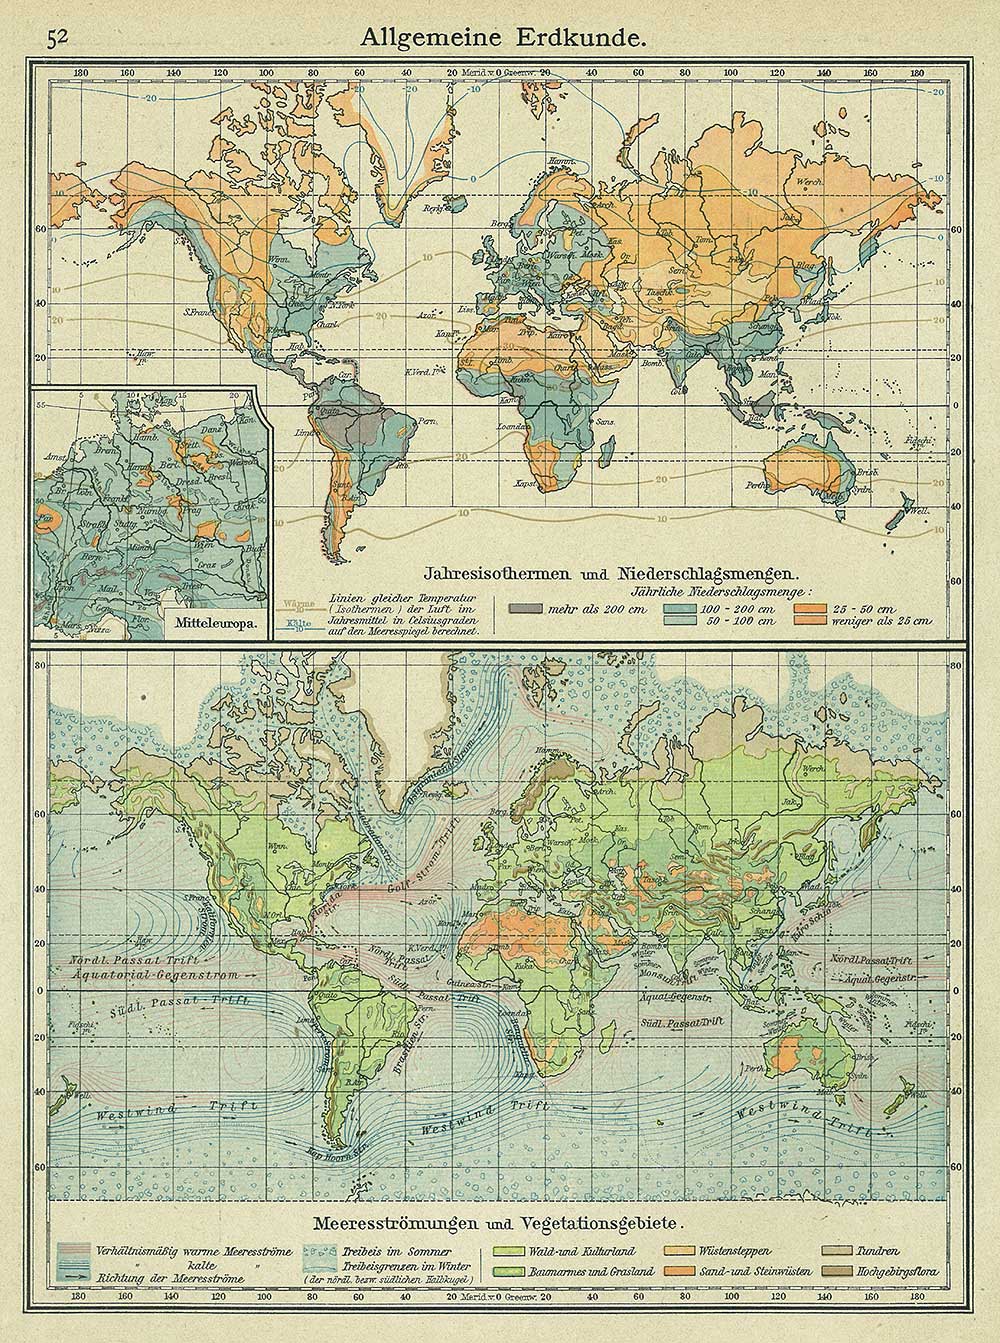 General world geography map, including trade winds and vegetation, Andrees 'Berliner Schul-Atlas', 1916, page 52, published size to print borders 18.88 cm wide by 25.59 cm high.